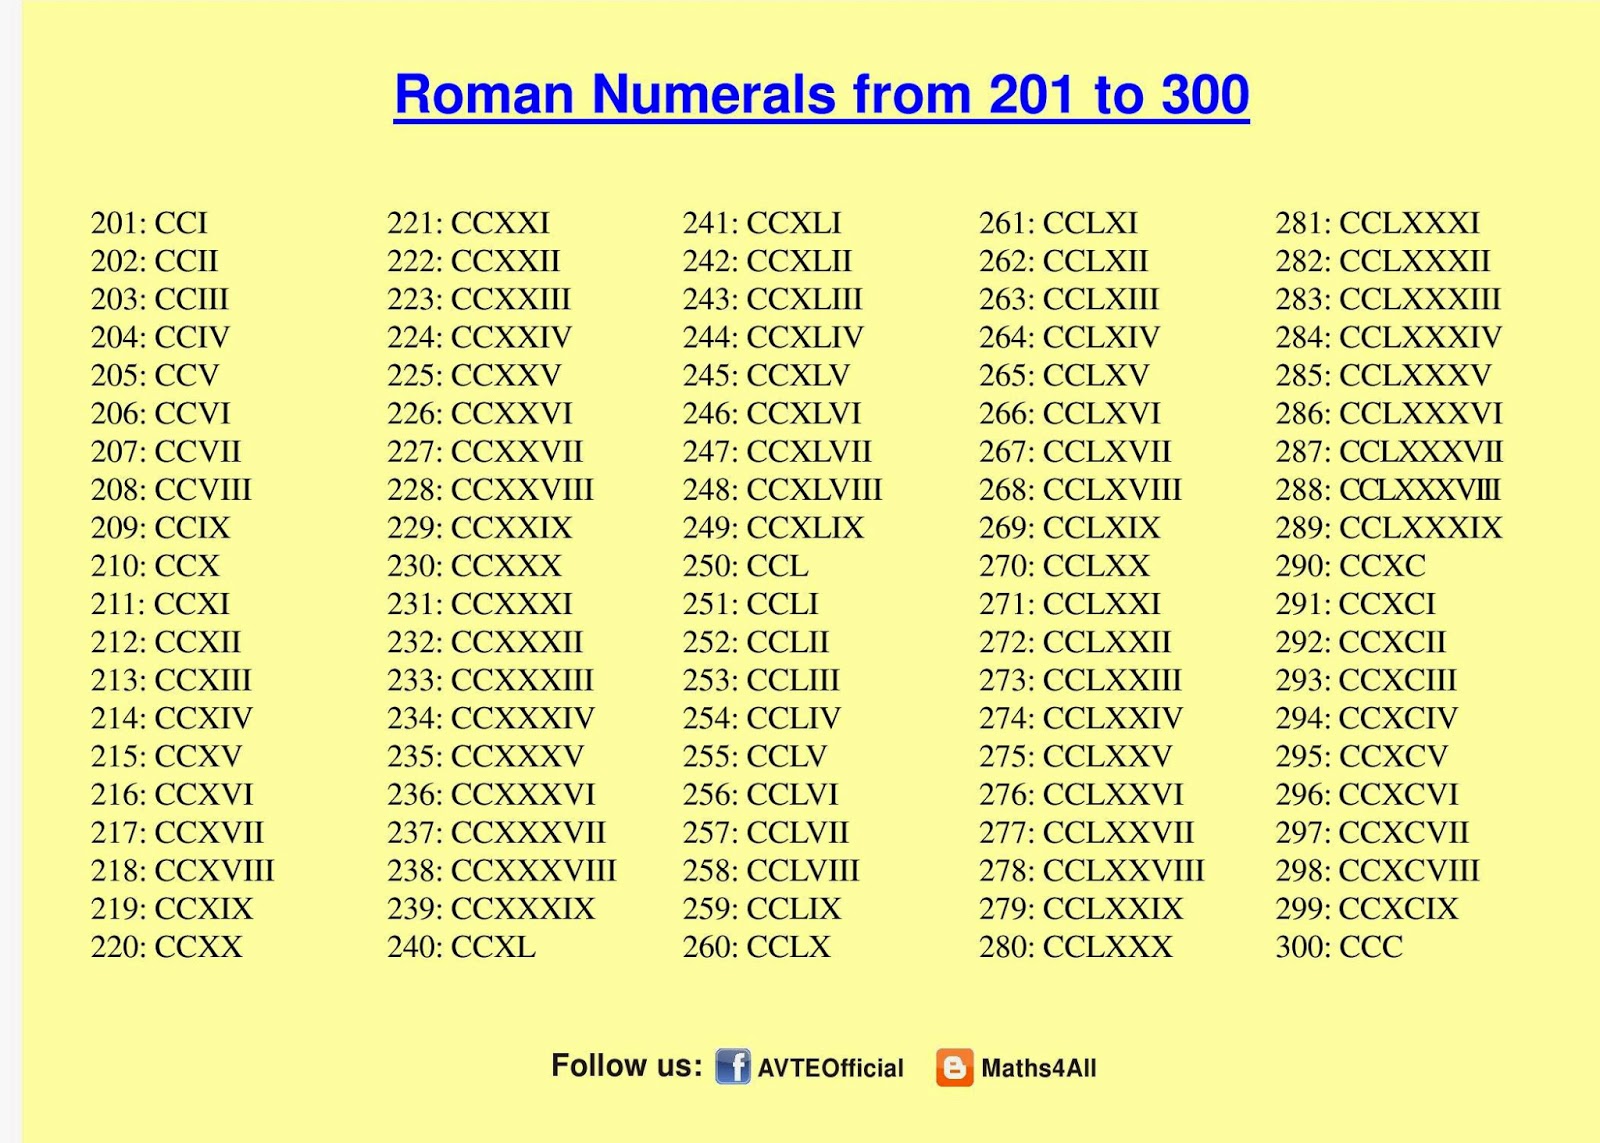 maths4all-roman-numerals-201-to-300